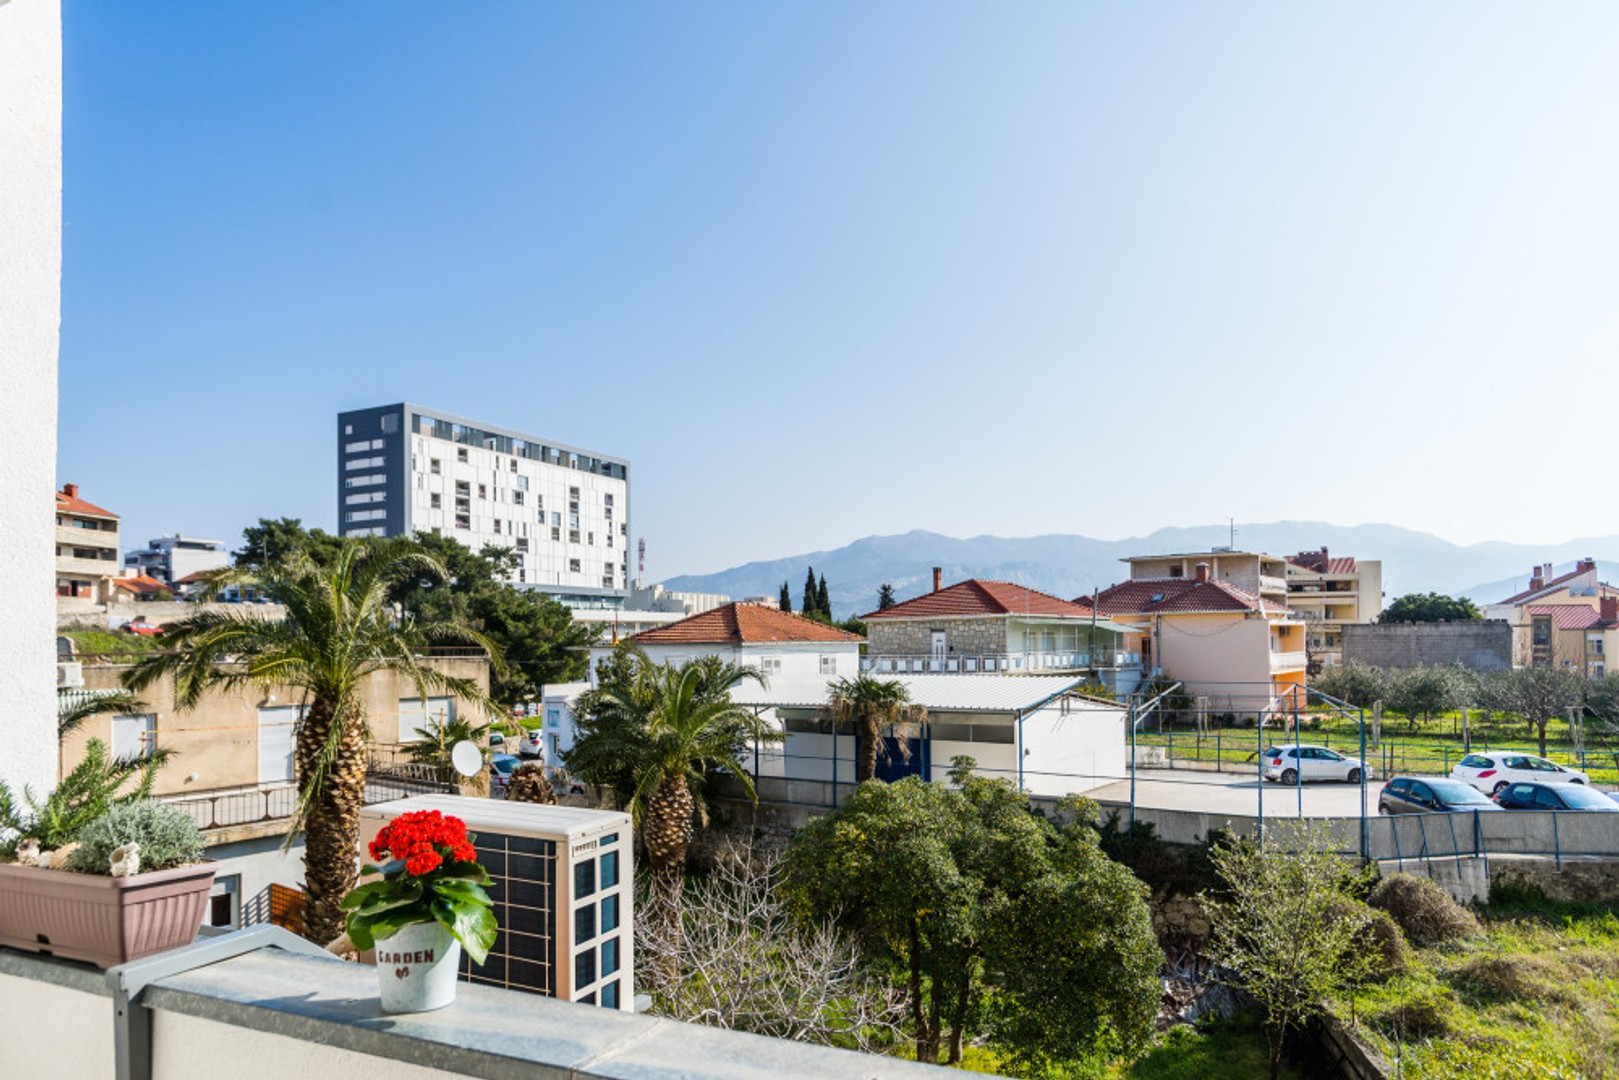 Accommodation in the centre of Split